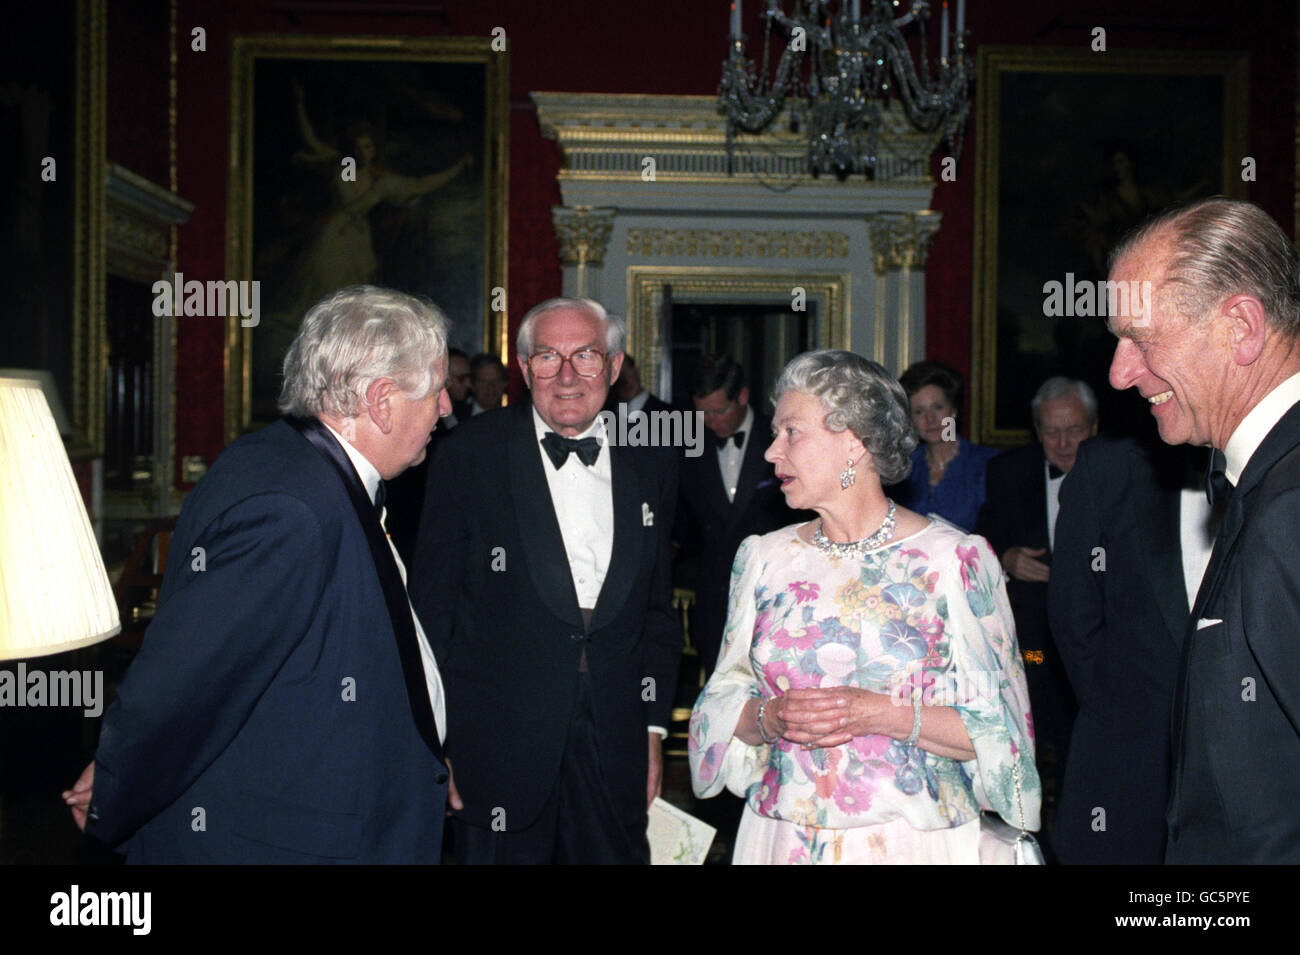 THE QUEEN AND DUKE OF EDINBURGH TALK WITH PETER USTINOV AND LORD CALLAGHAN AFTER THE PRIME MINISTERIAL BANQUET HELF AT SPENCER HOUSE TO MARK THE 40TH ANNIVERSARY OF HER ACCESSION. Stock Photo